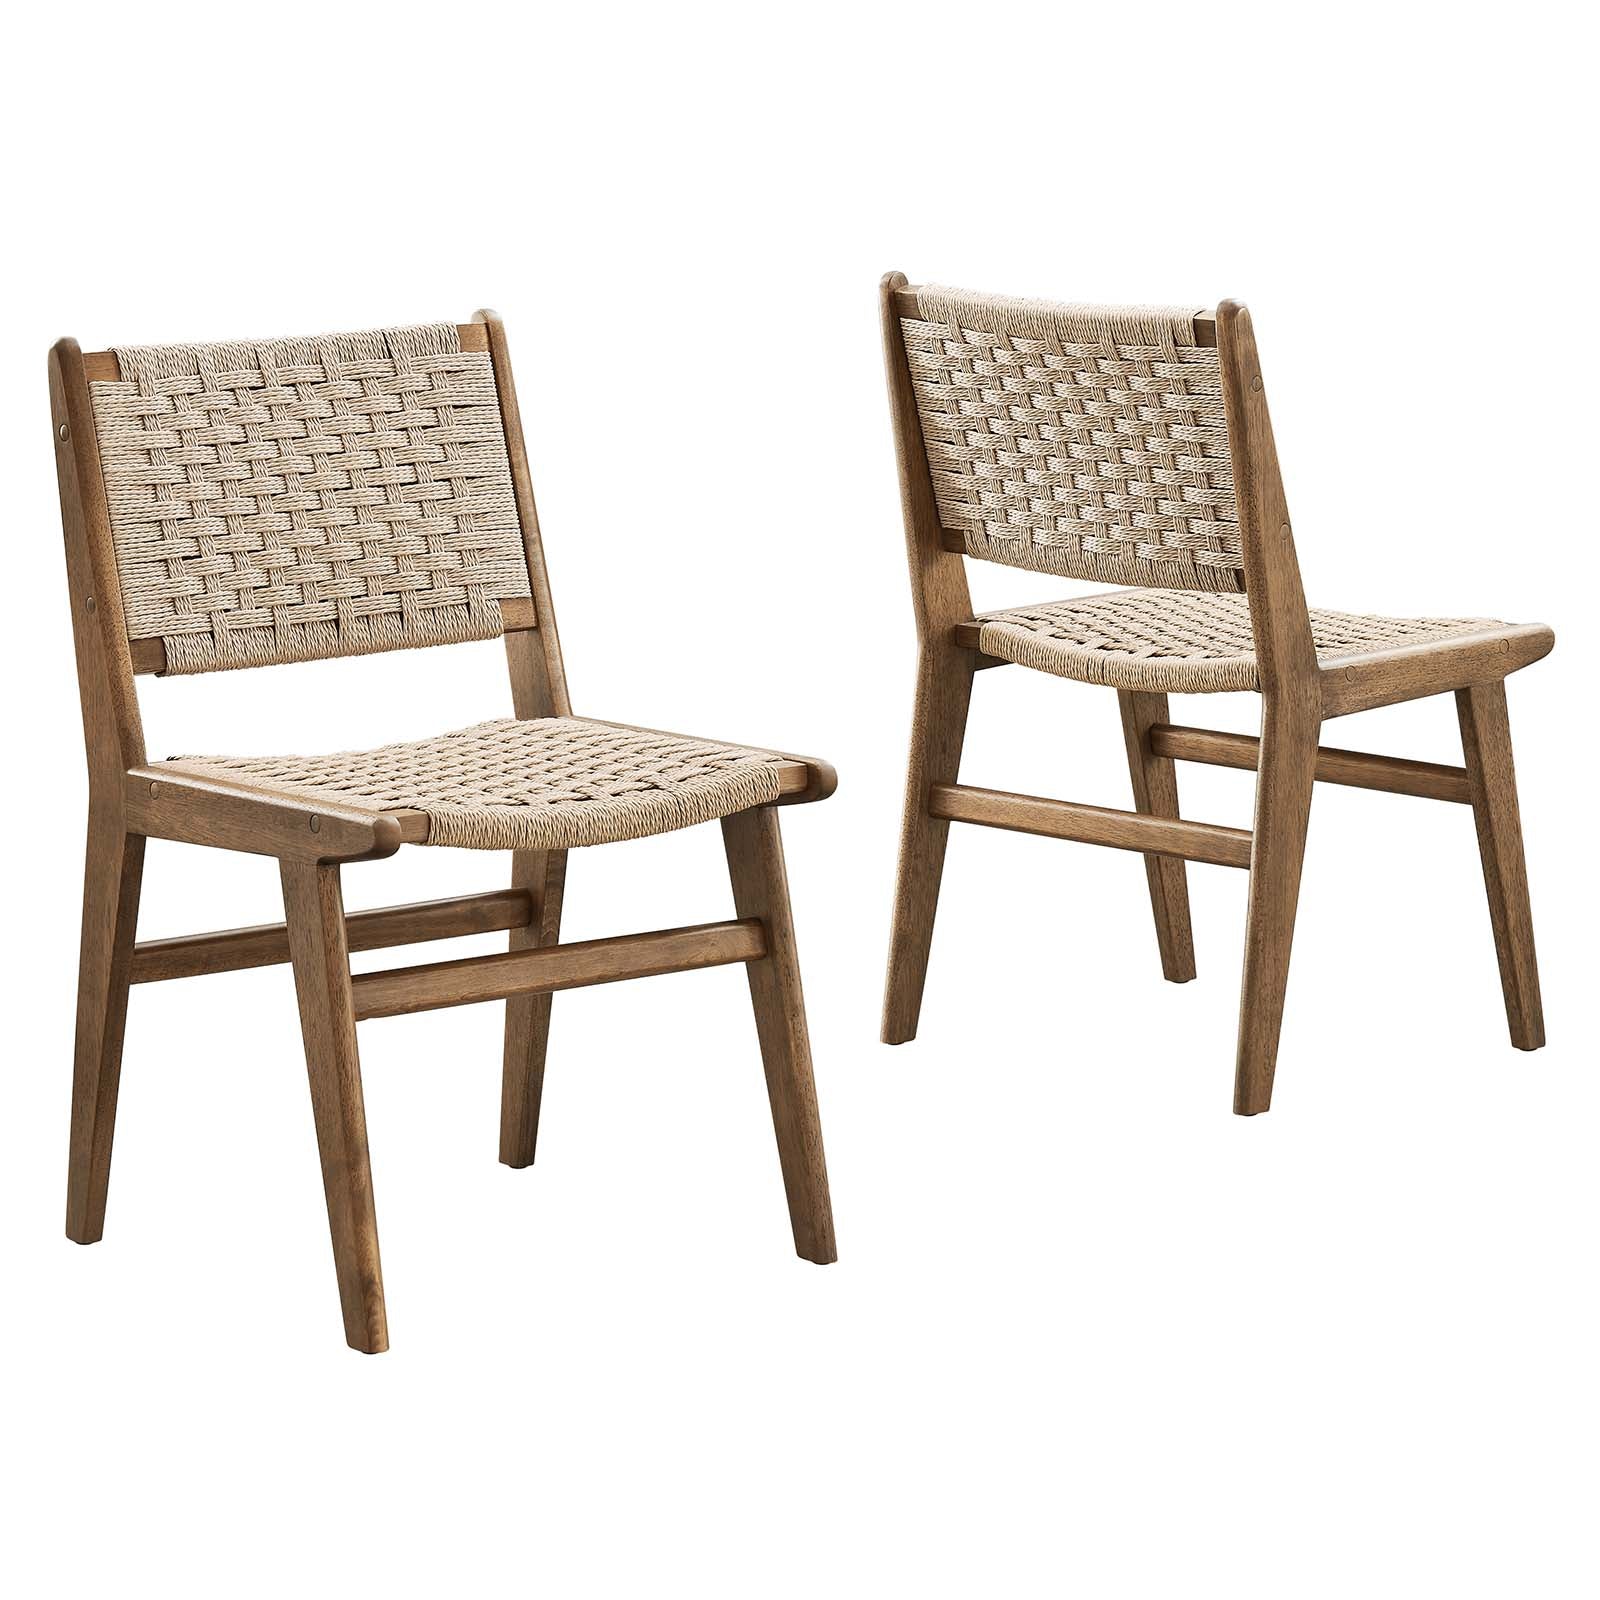 Saoirse Woven Rope Wood Dining Side Chair - Set of 2